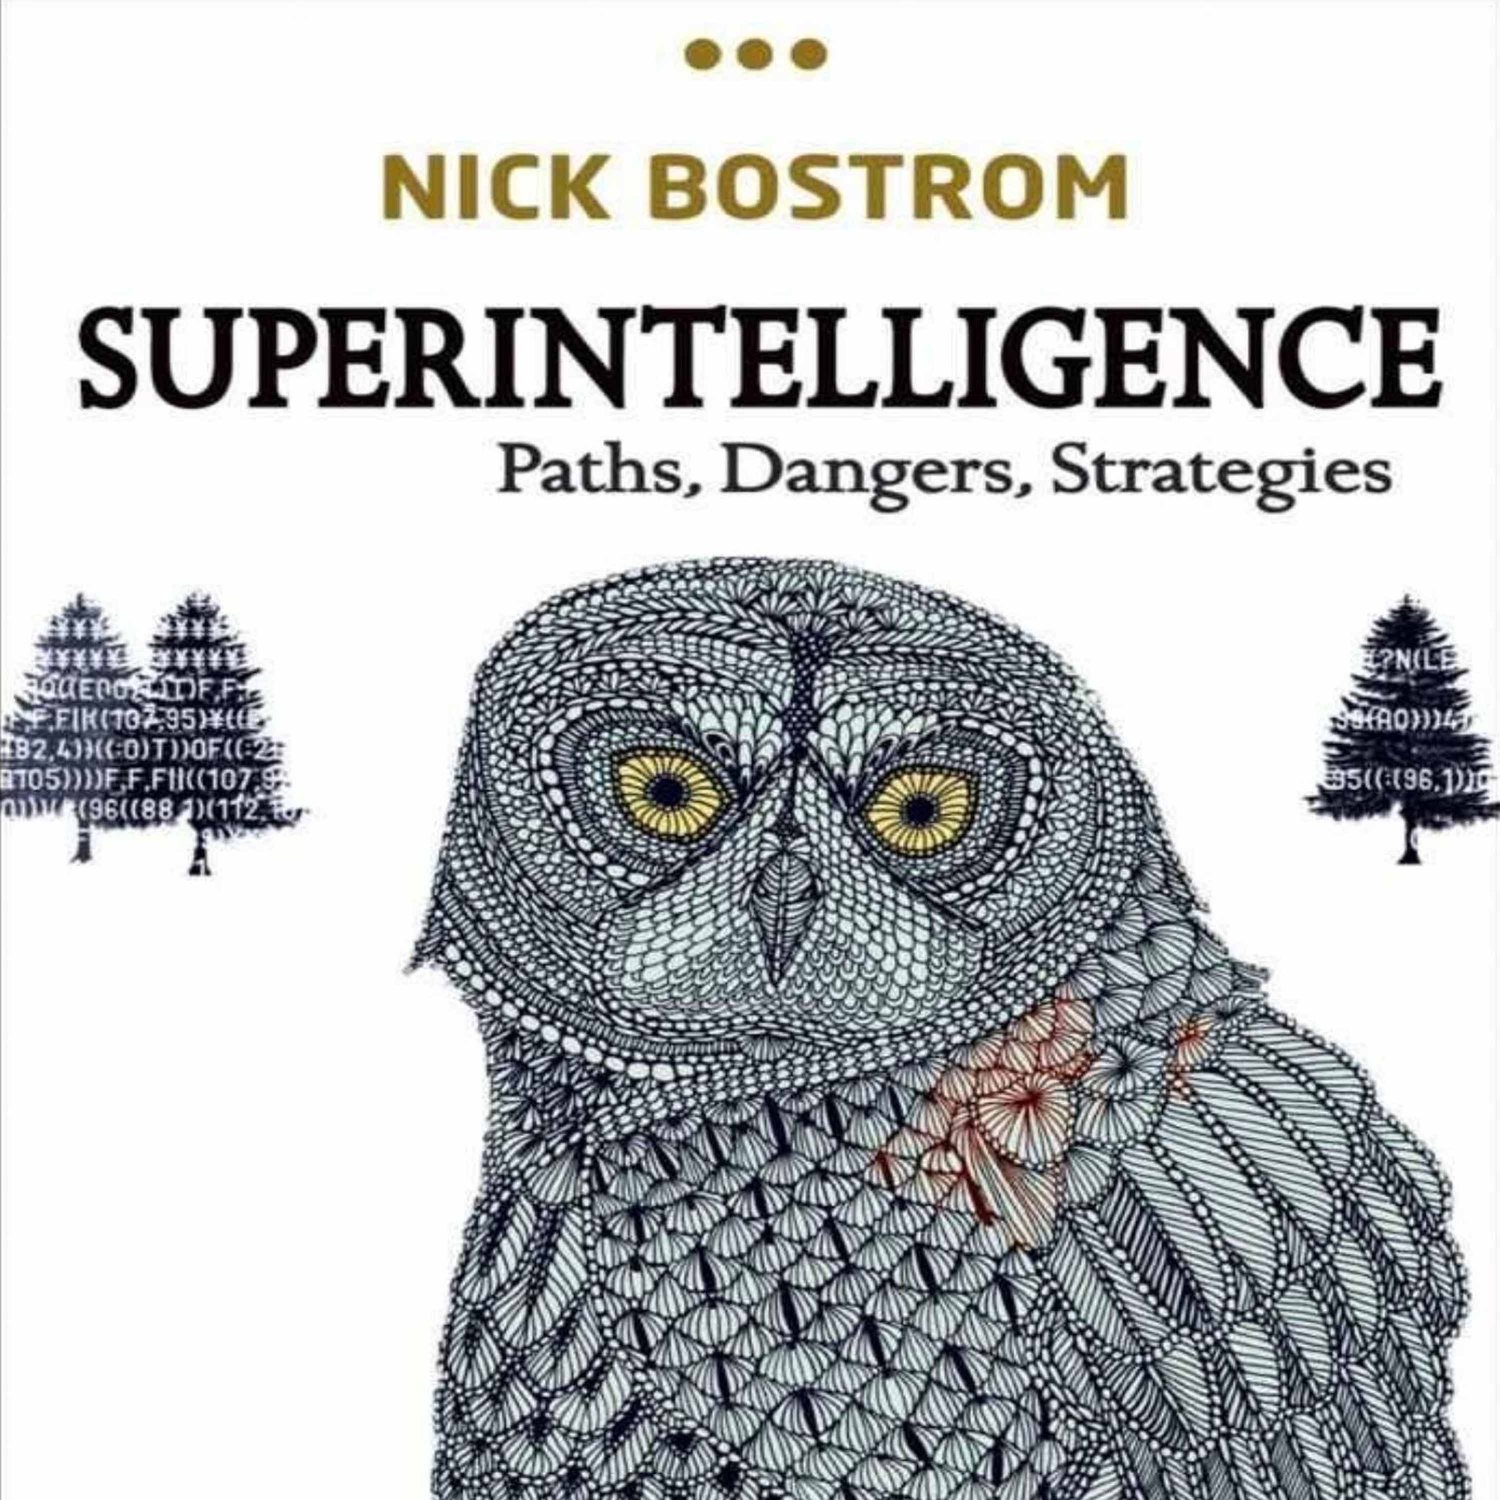 Cover image of Nick Bostrom's 'Superintelligence'